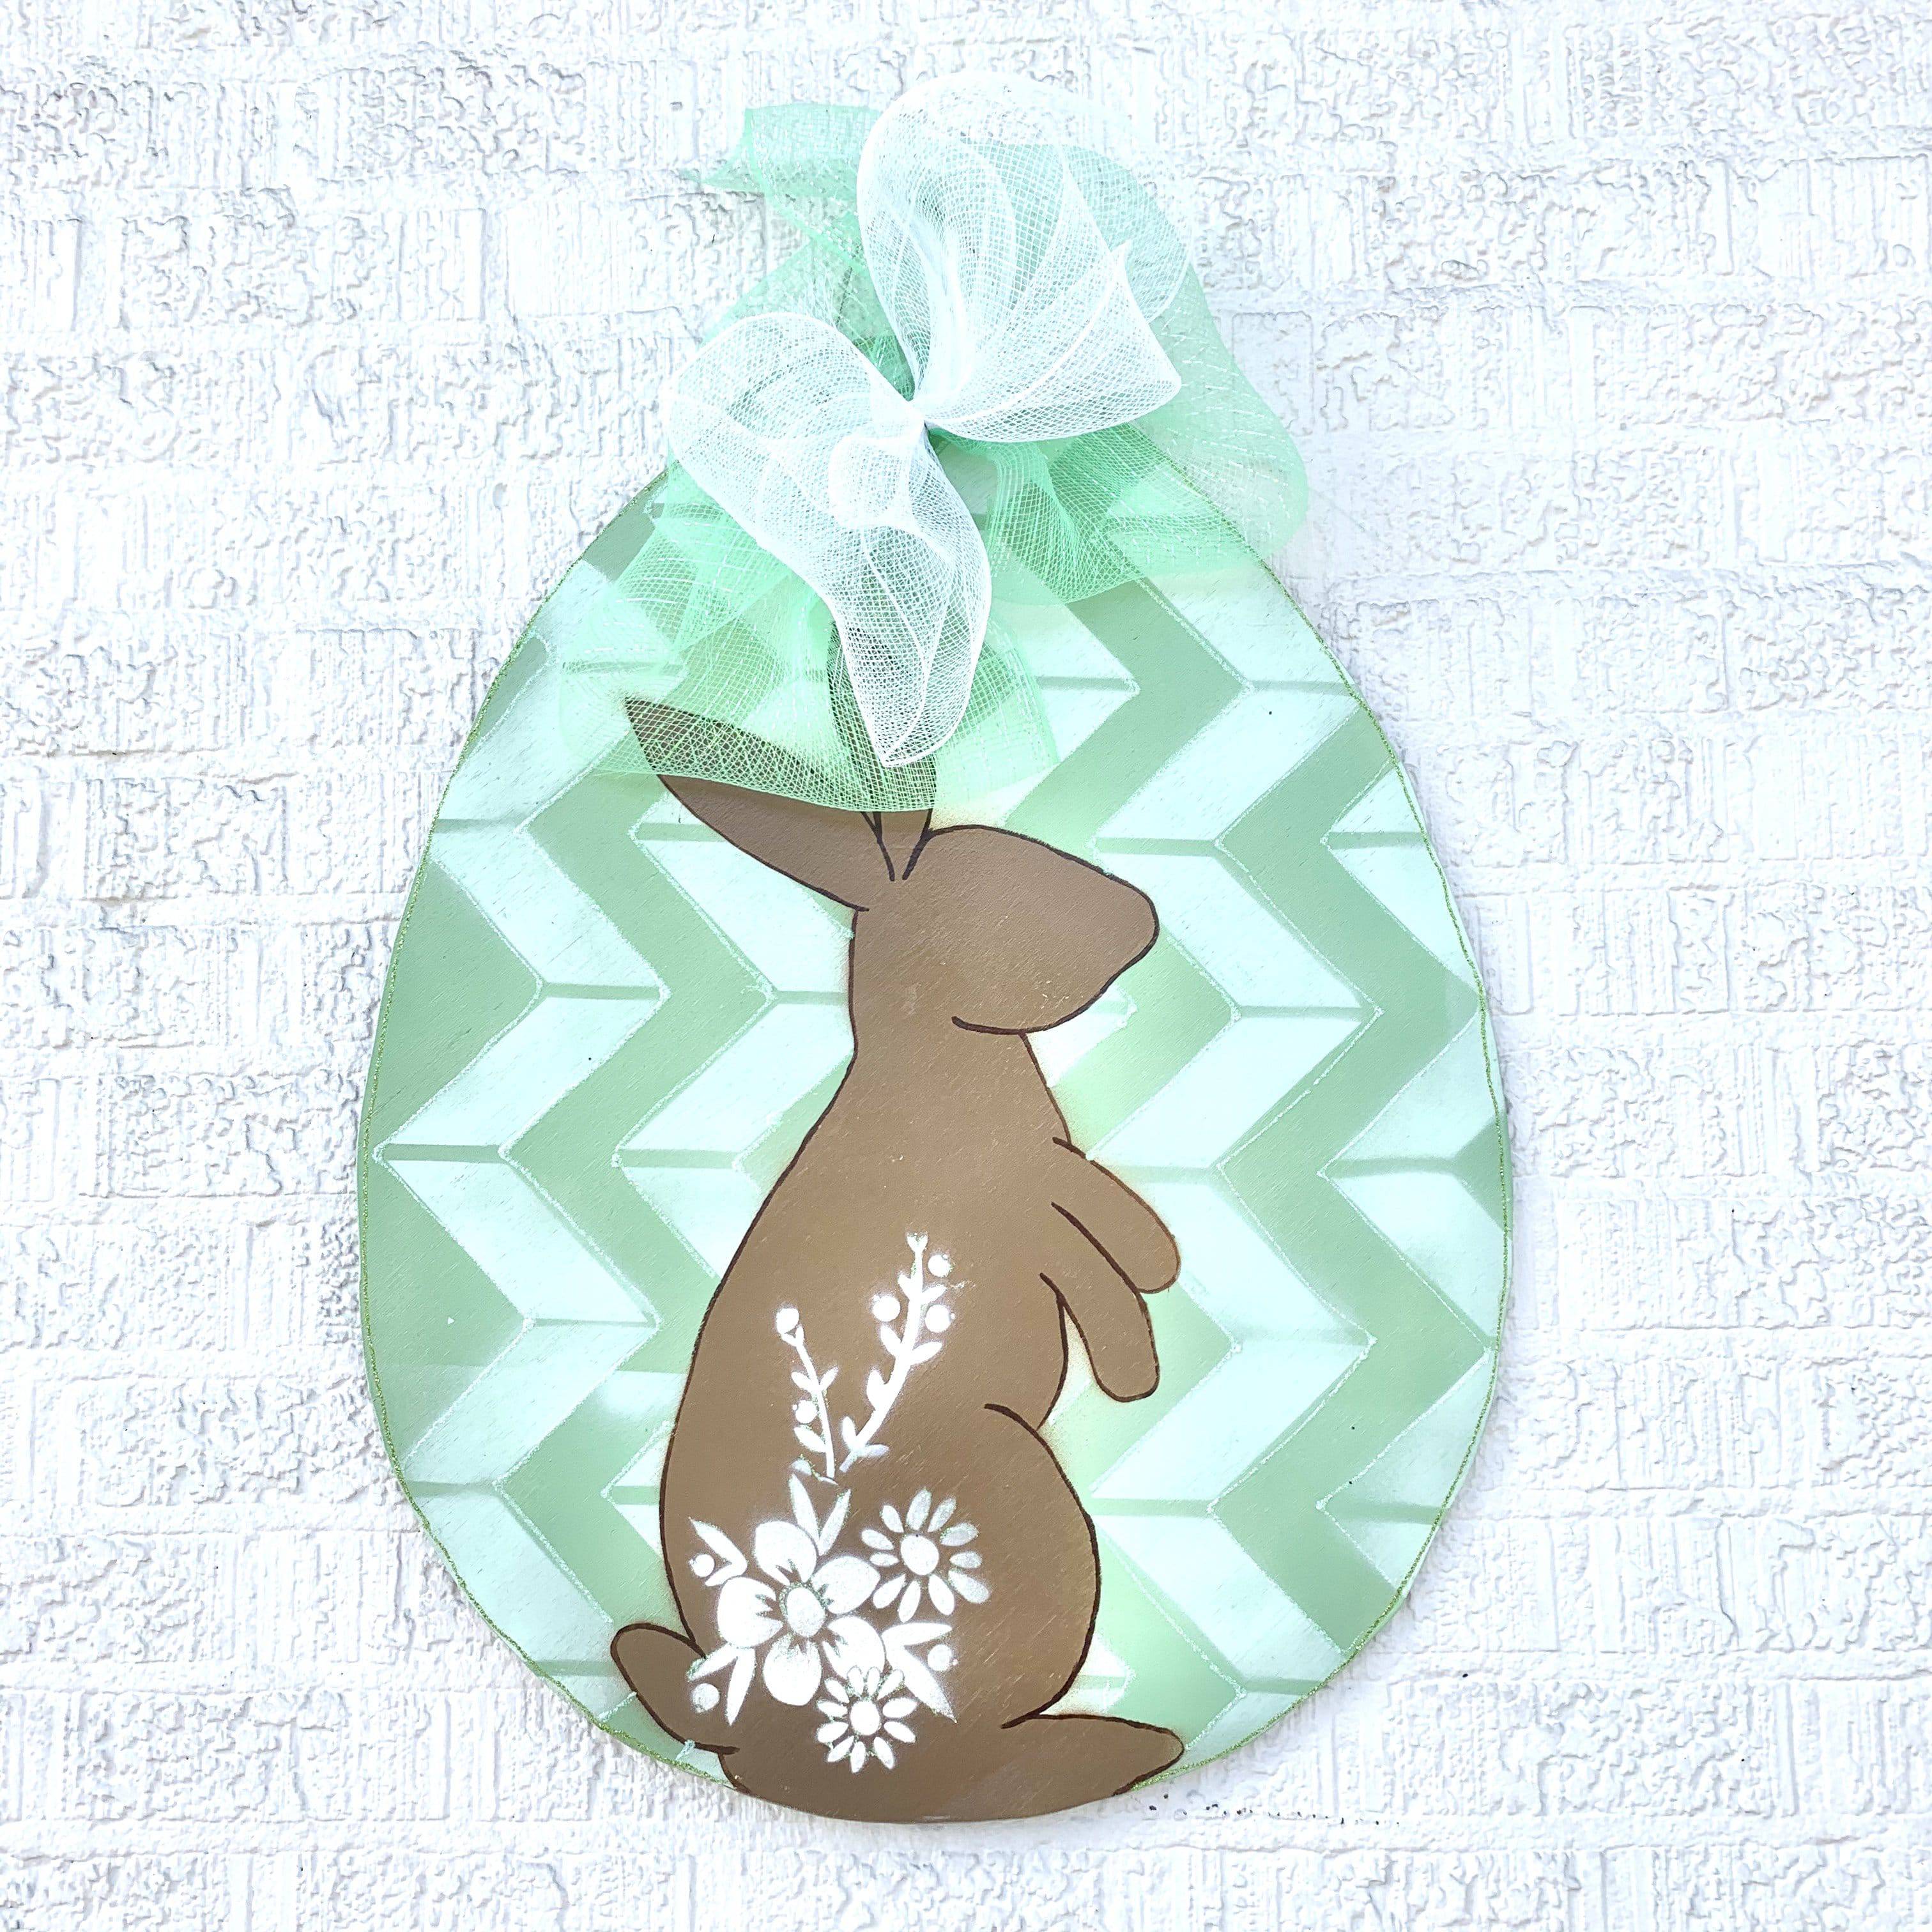 Toodle Lou Designs - Toodle Lou Designs Egg With Bunny Silhouette Wooden Door Hanger - Little Miss Muffin Children & Home